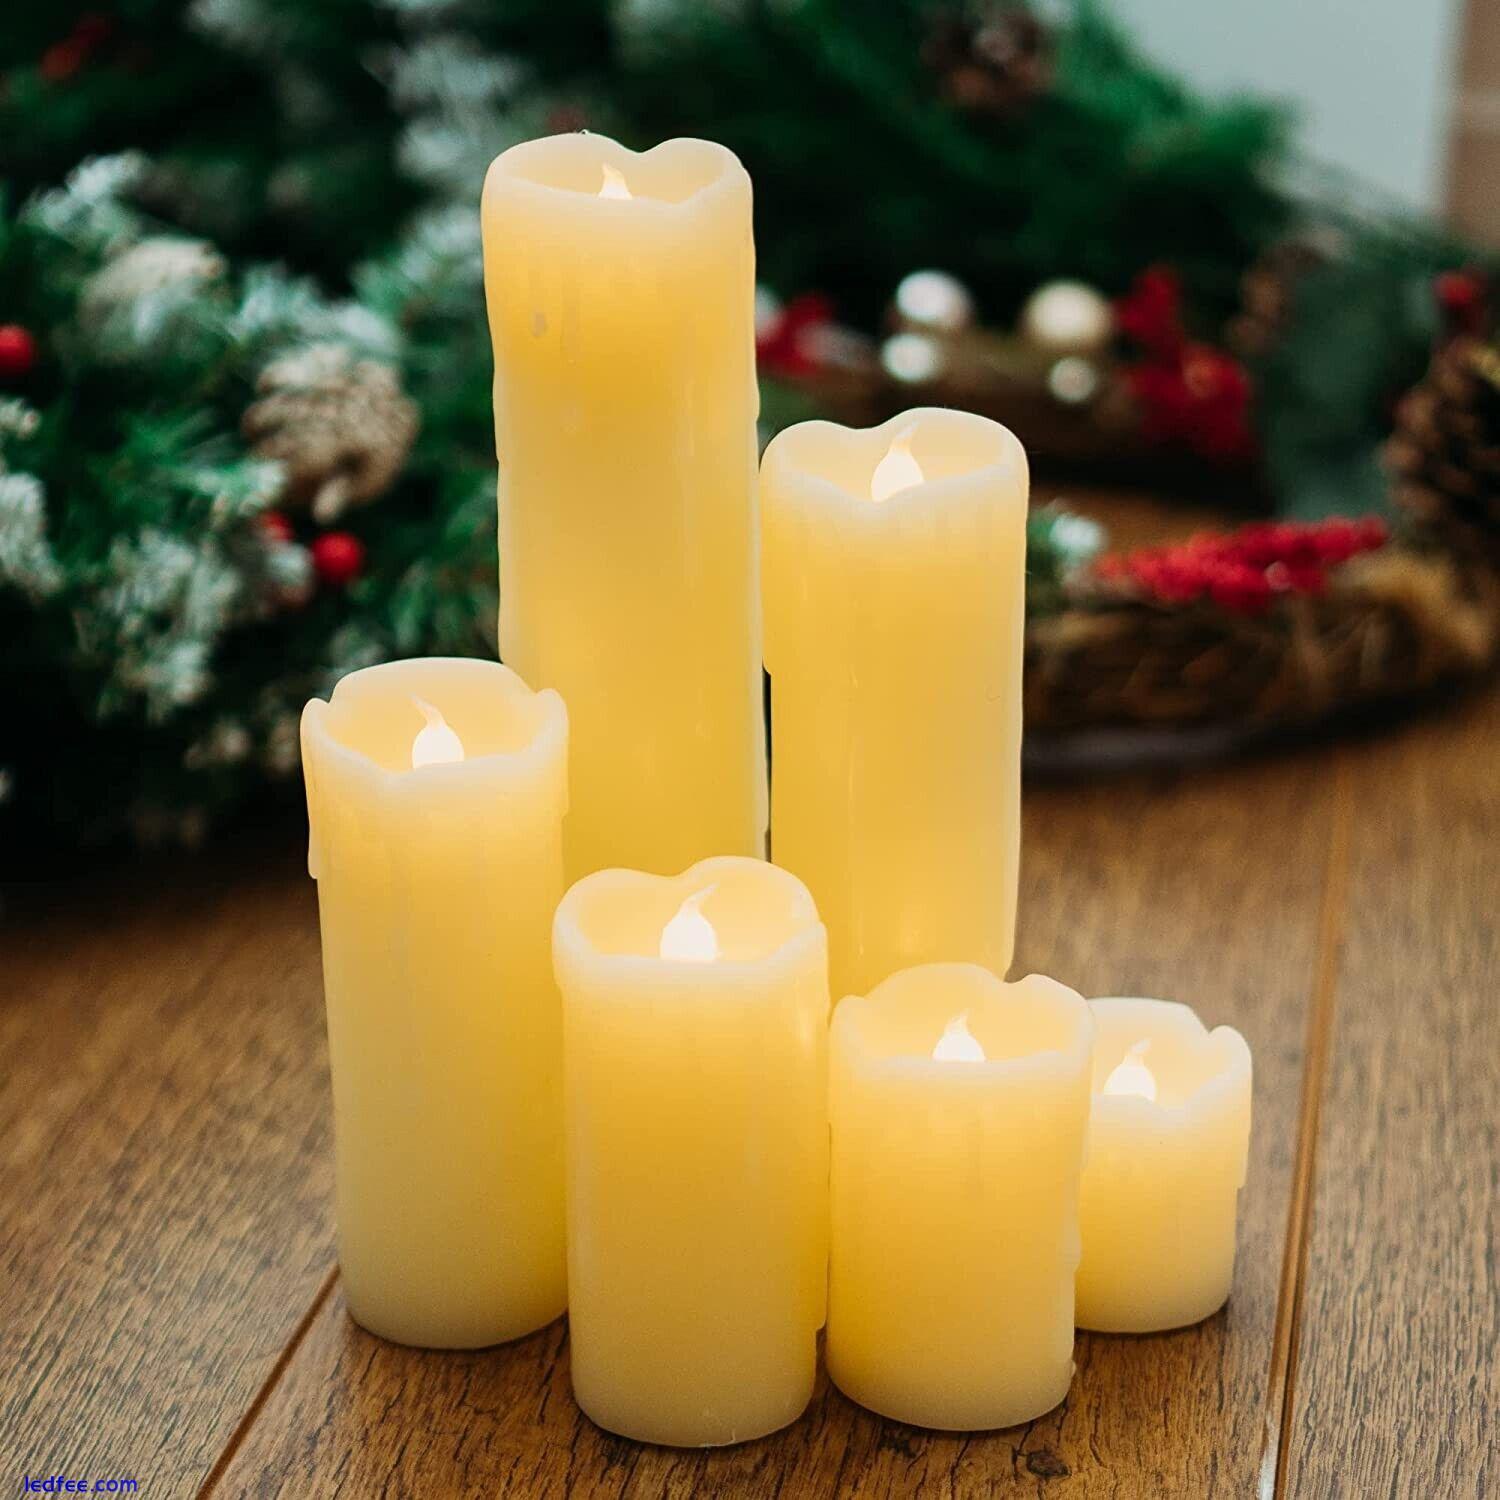 6-Piece Flameless Candle Set – Flickering LED Candles with Wax Drip Effect 4 